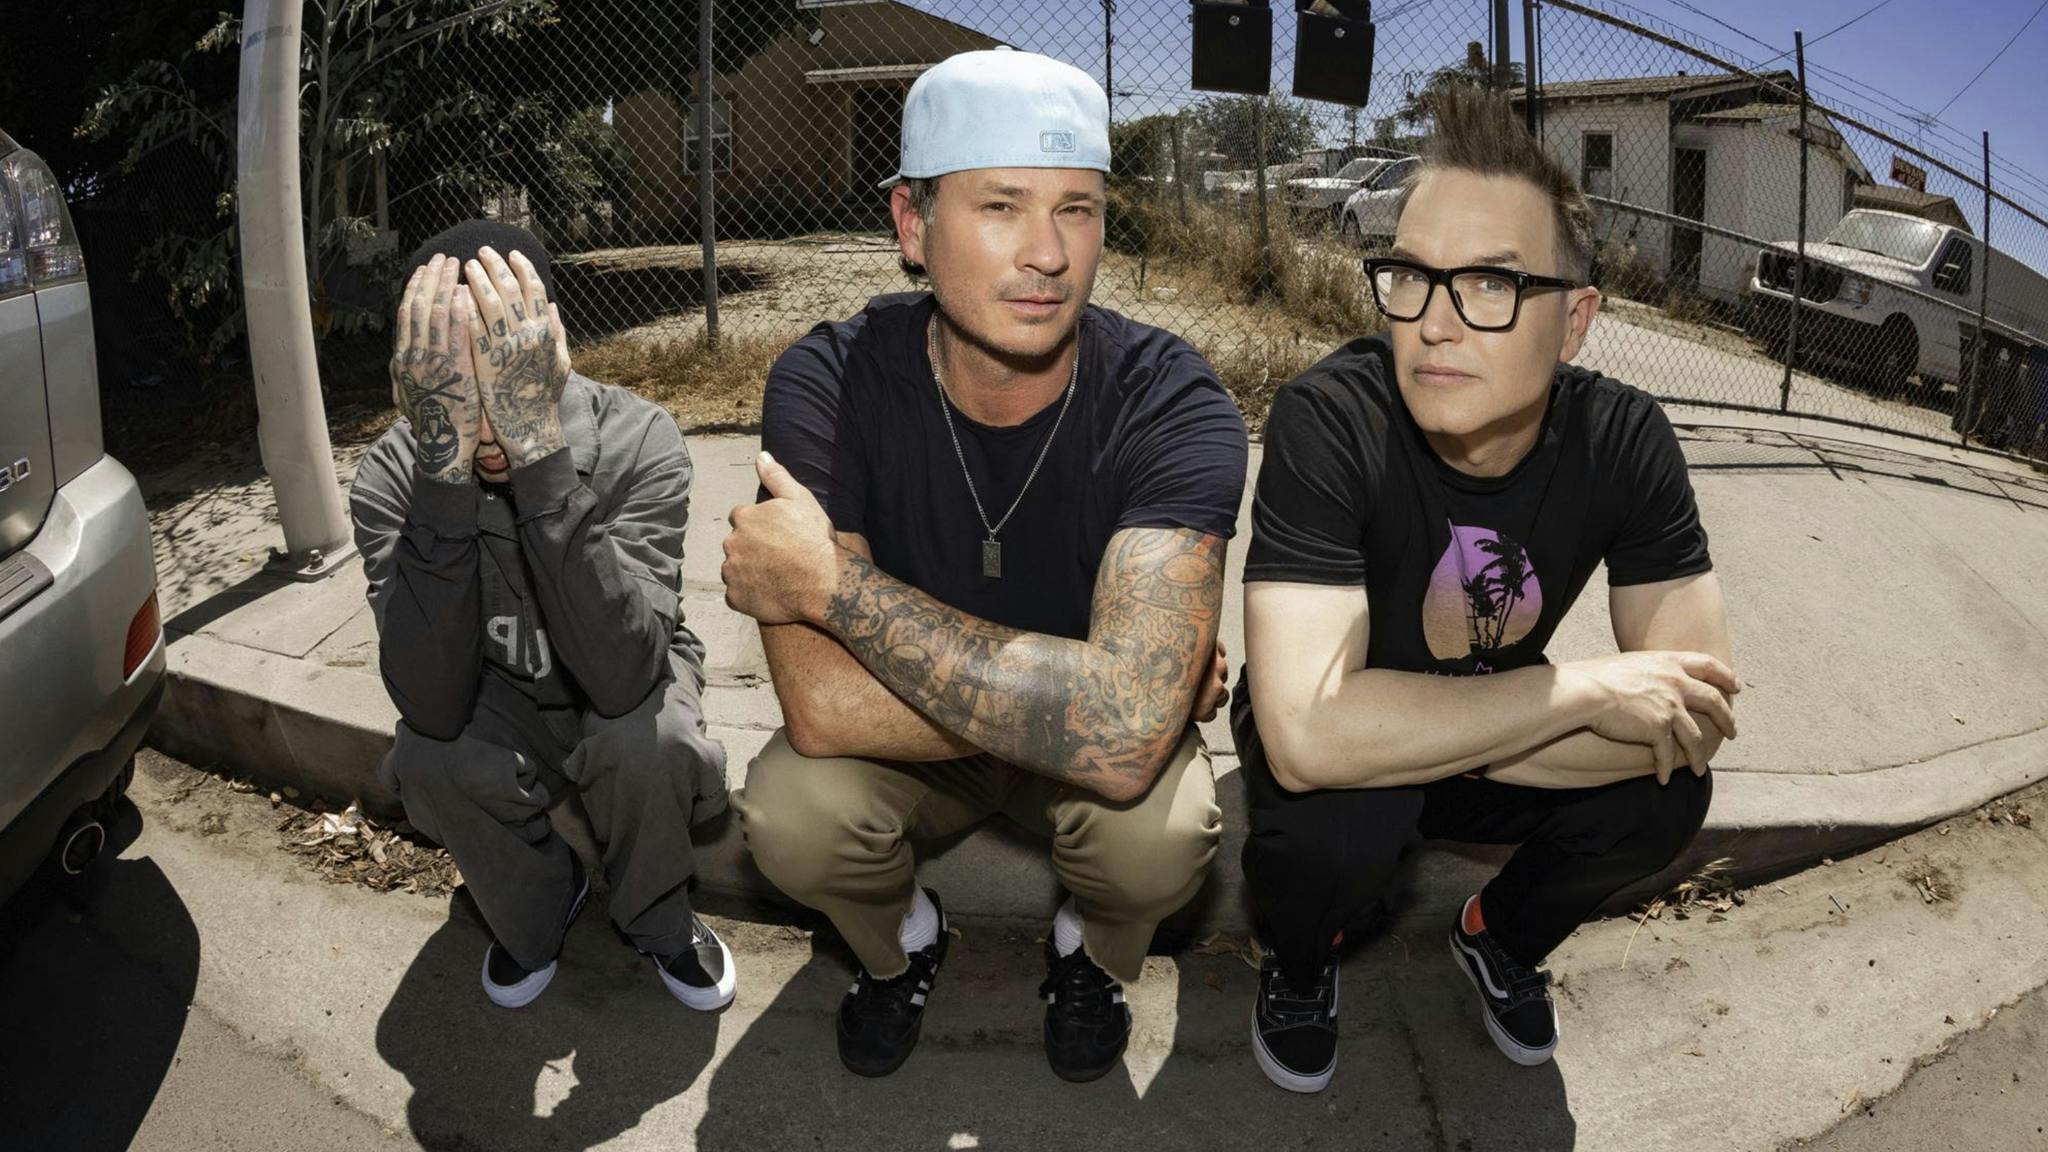 Surprise! blink-182 are streaming a second new song today, MORE THAN YOU KNOW